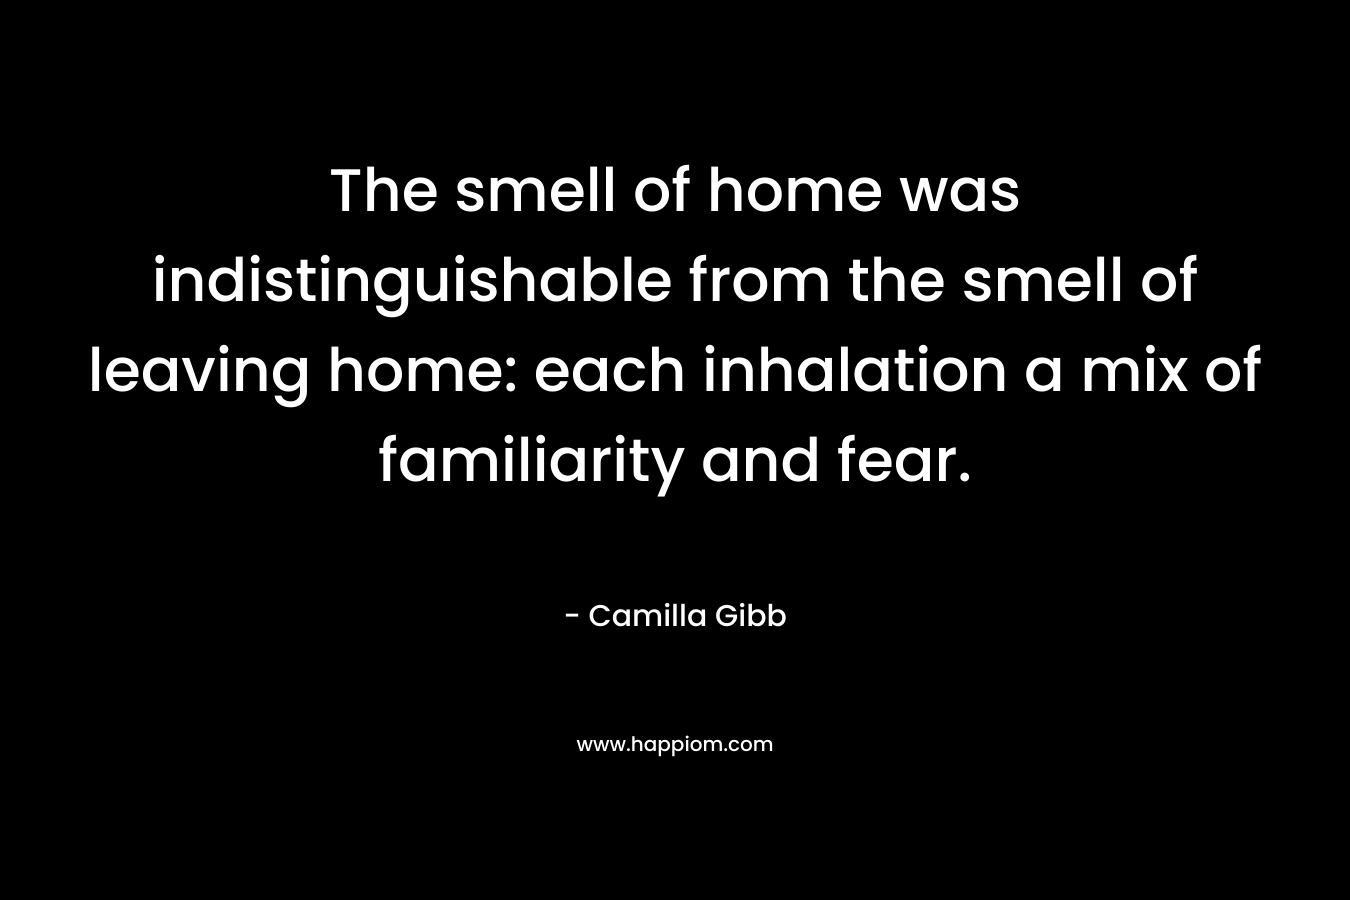 The smell of home was indistinguishable from the smell of leaving home: each inhalation a mix of familiarity and fear.